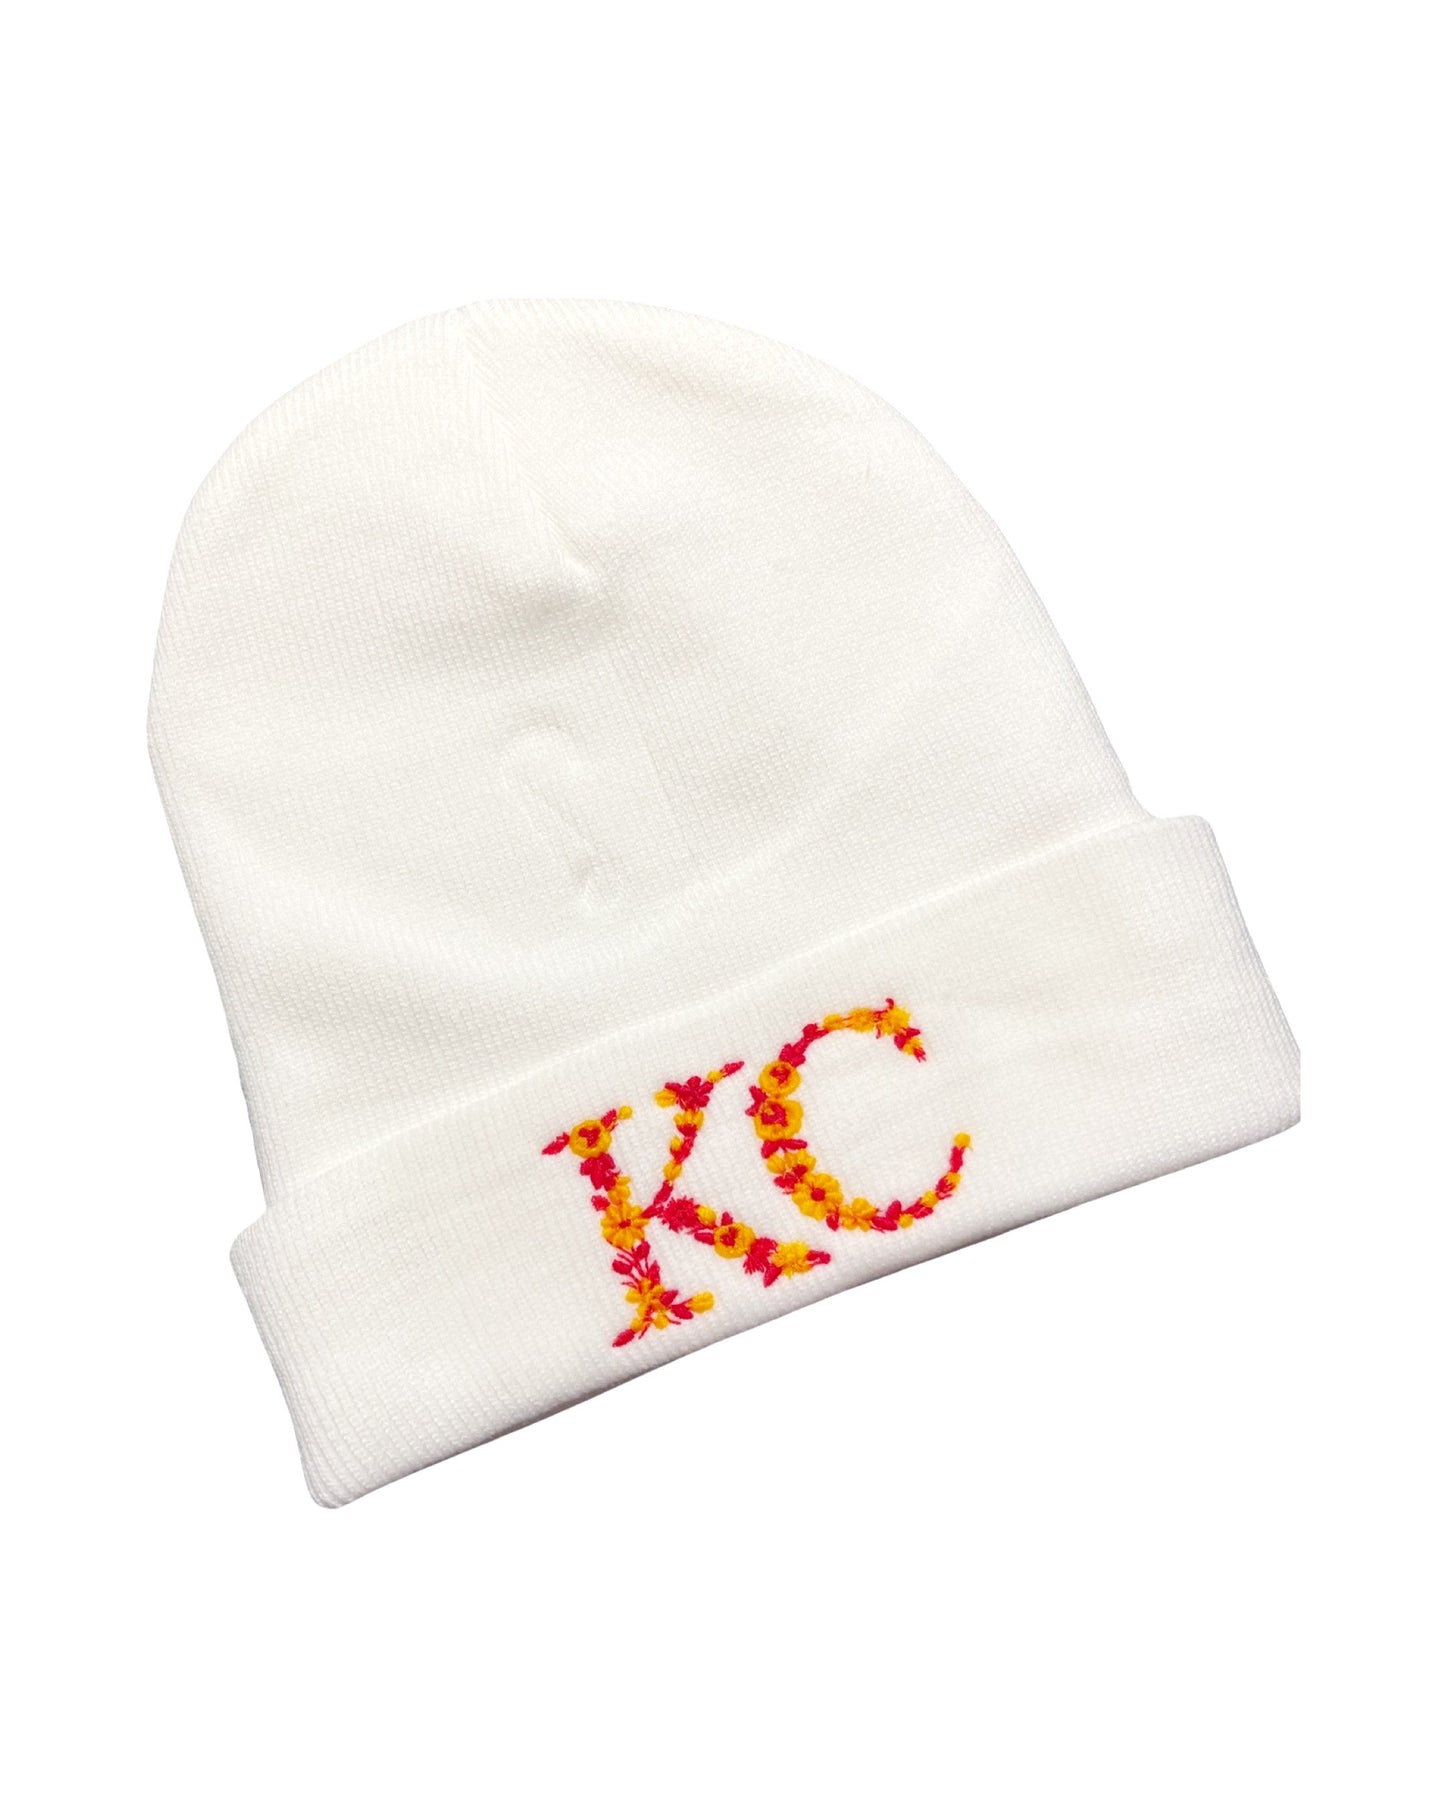 white acrylic beanie embroidered with the letters KC made of red and yellow kc chiefs colored flowers